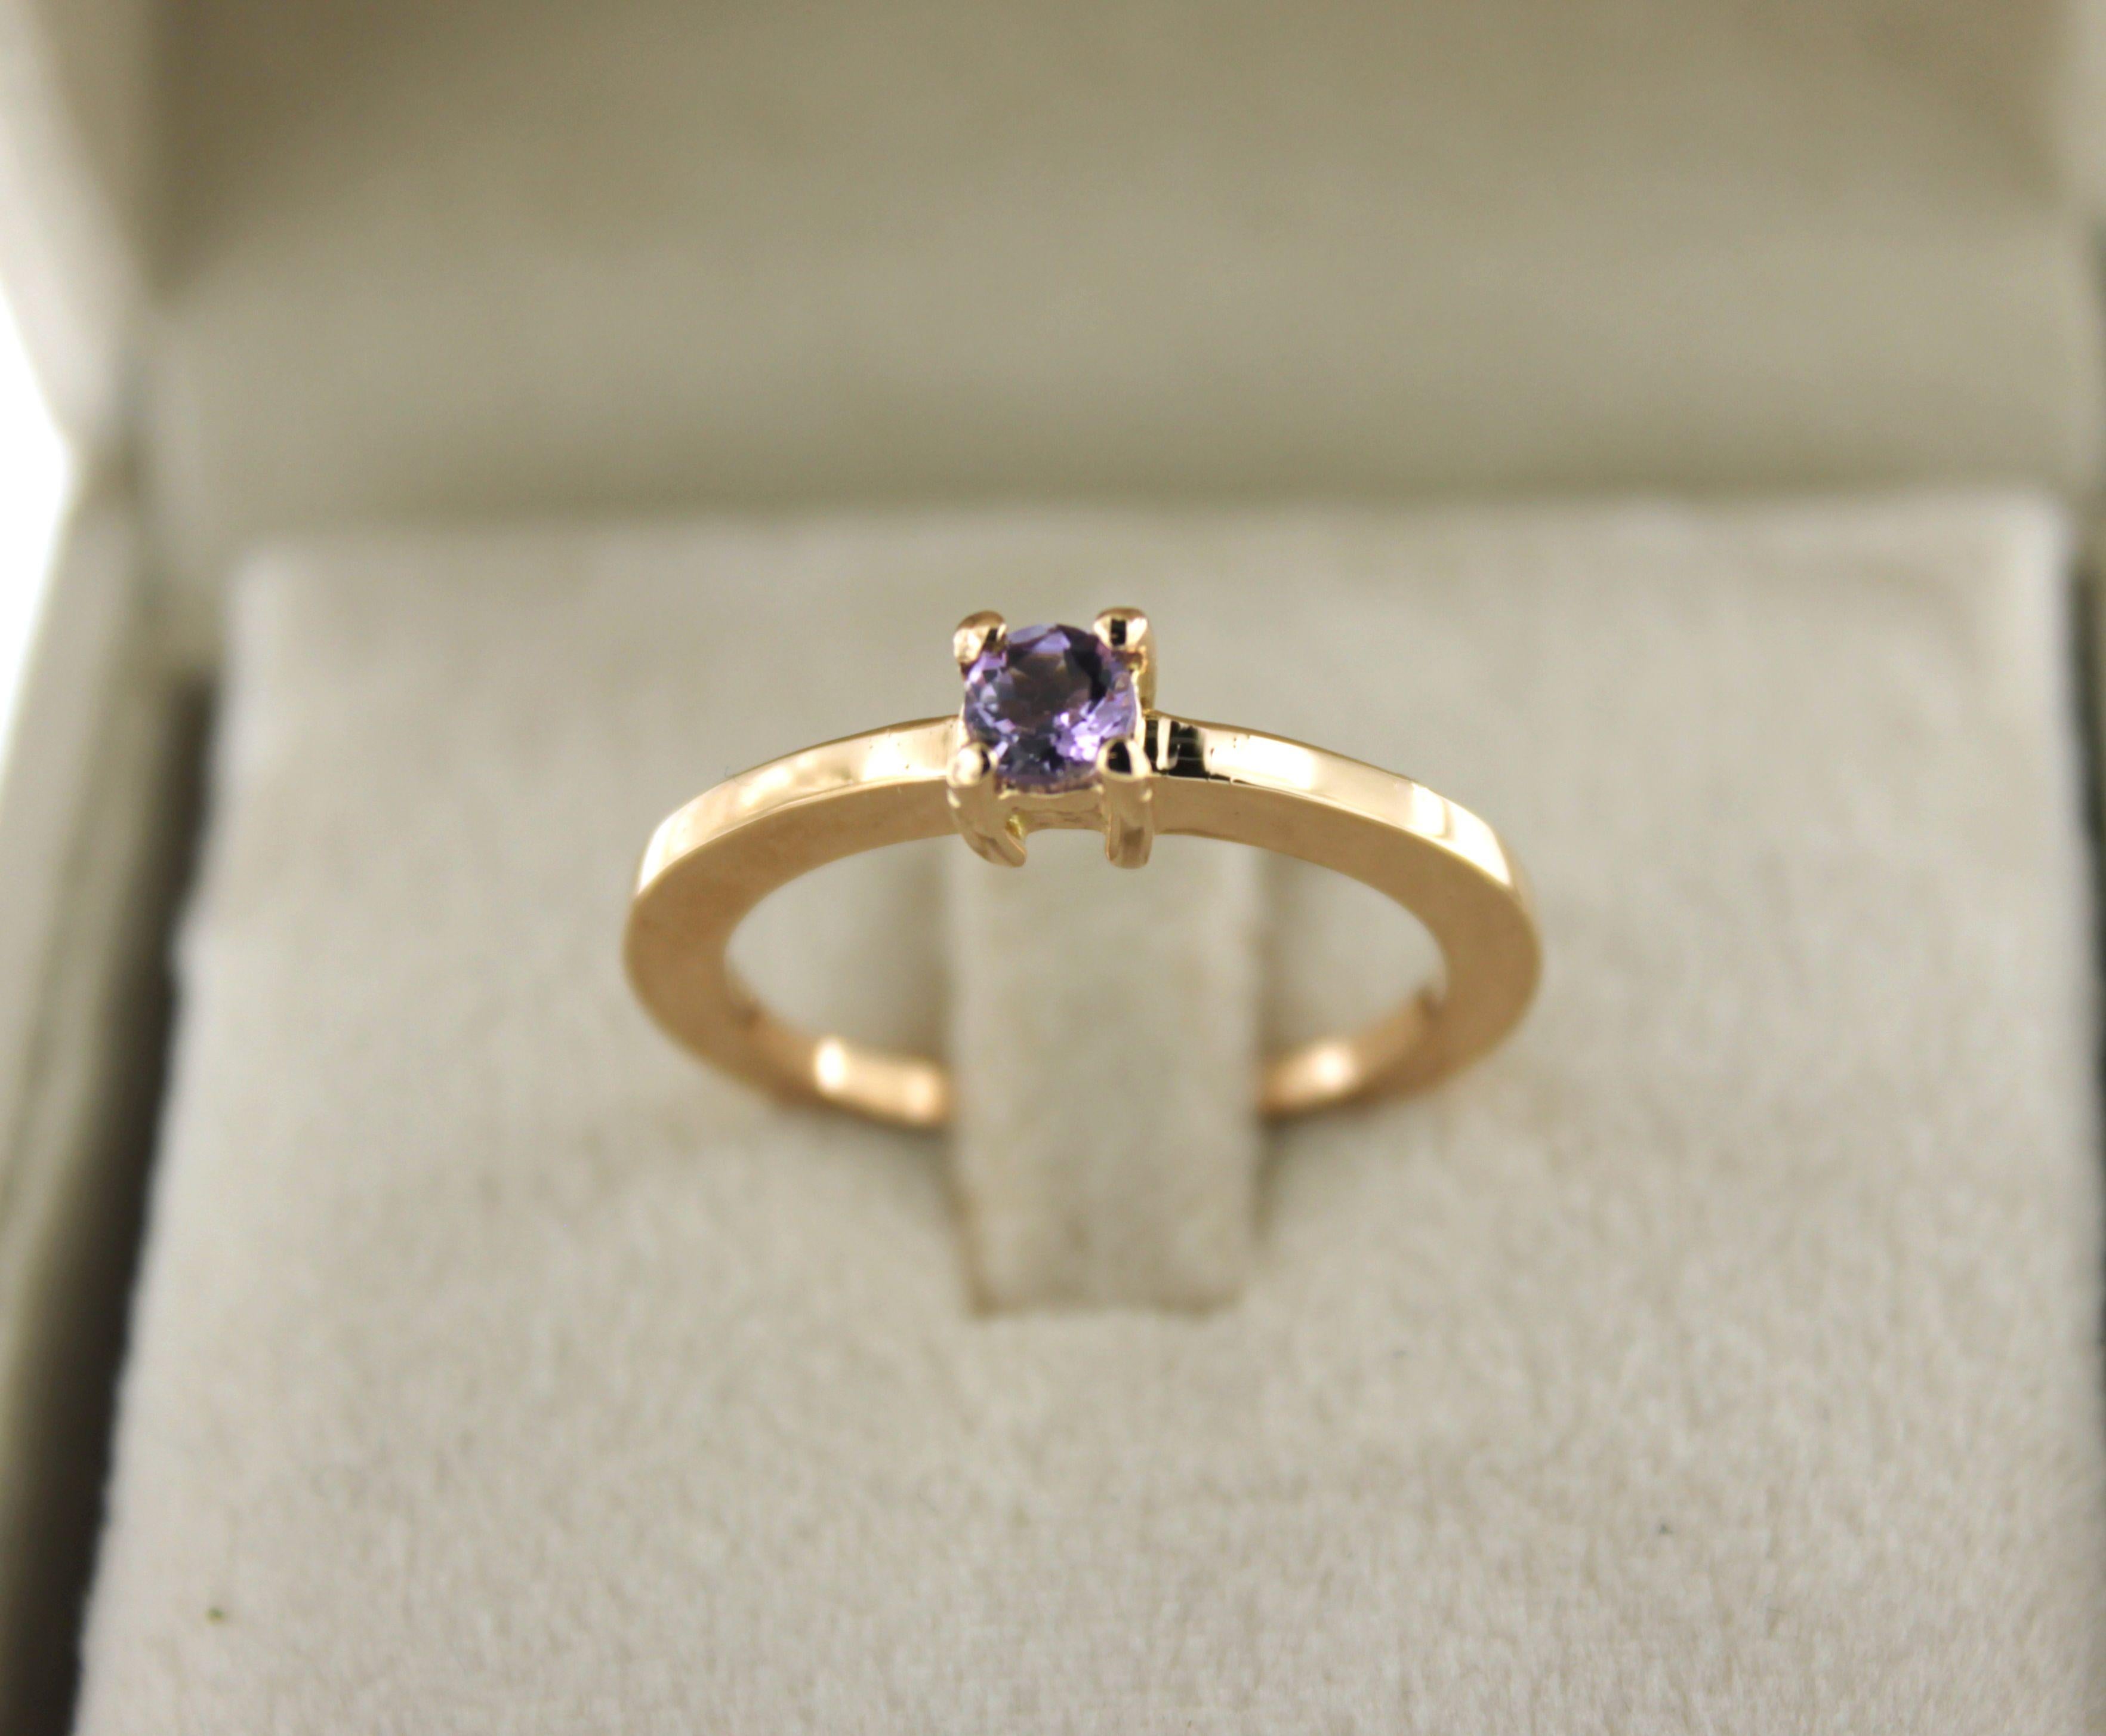 Special ring in rose gold with natural stone Amethyst  elegant and classic modern cocktail or engagement  ring in rose gold 18kt with natural stone amethyst  . Ideal ring to wear every day, made in Italy by Stanoppi Jewellery since 1948 
a ring with